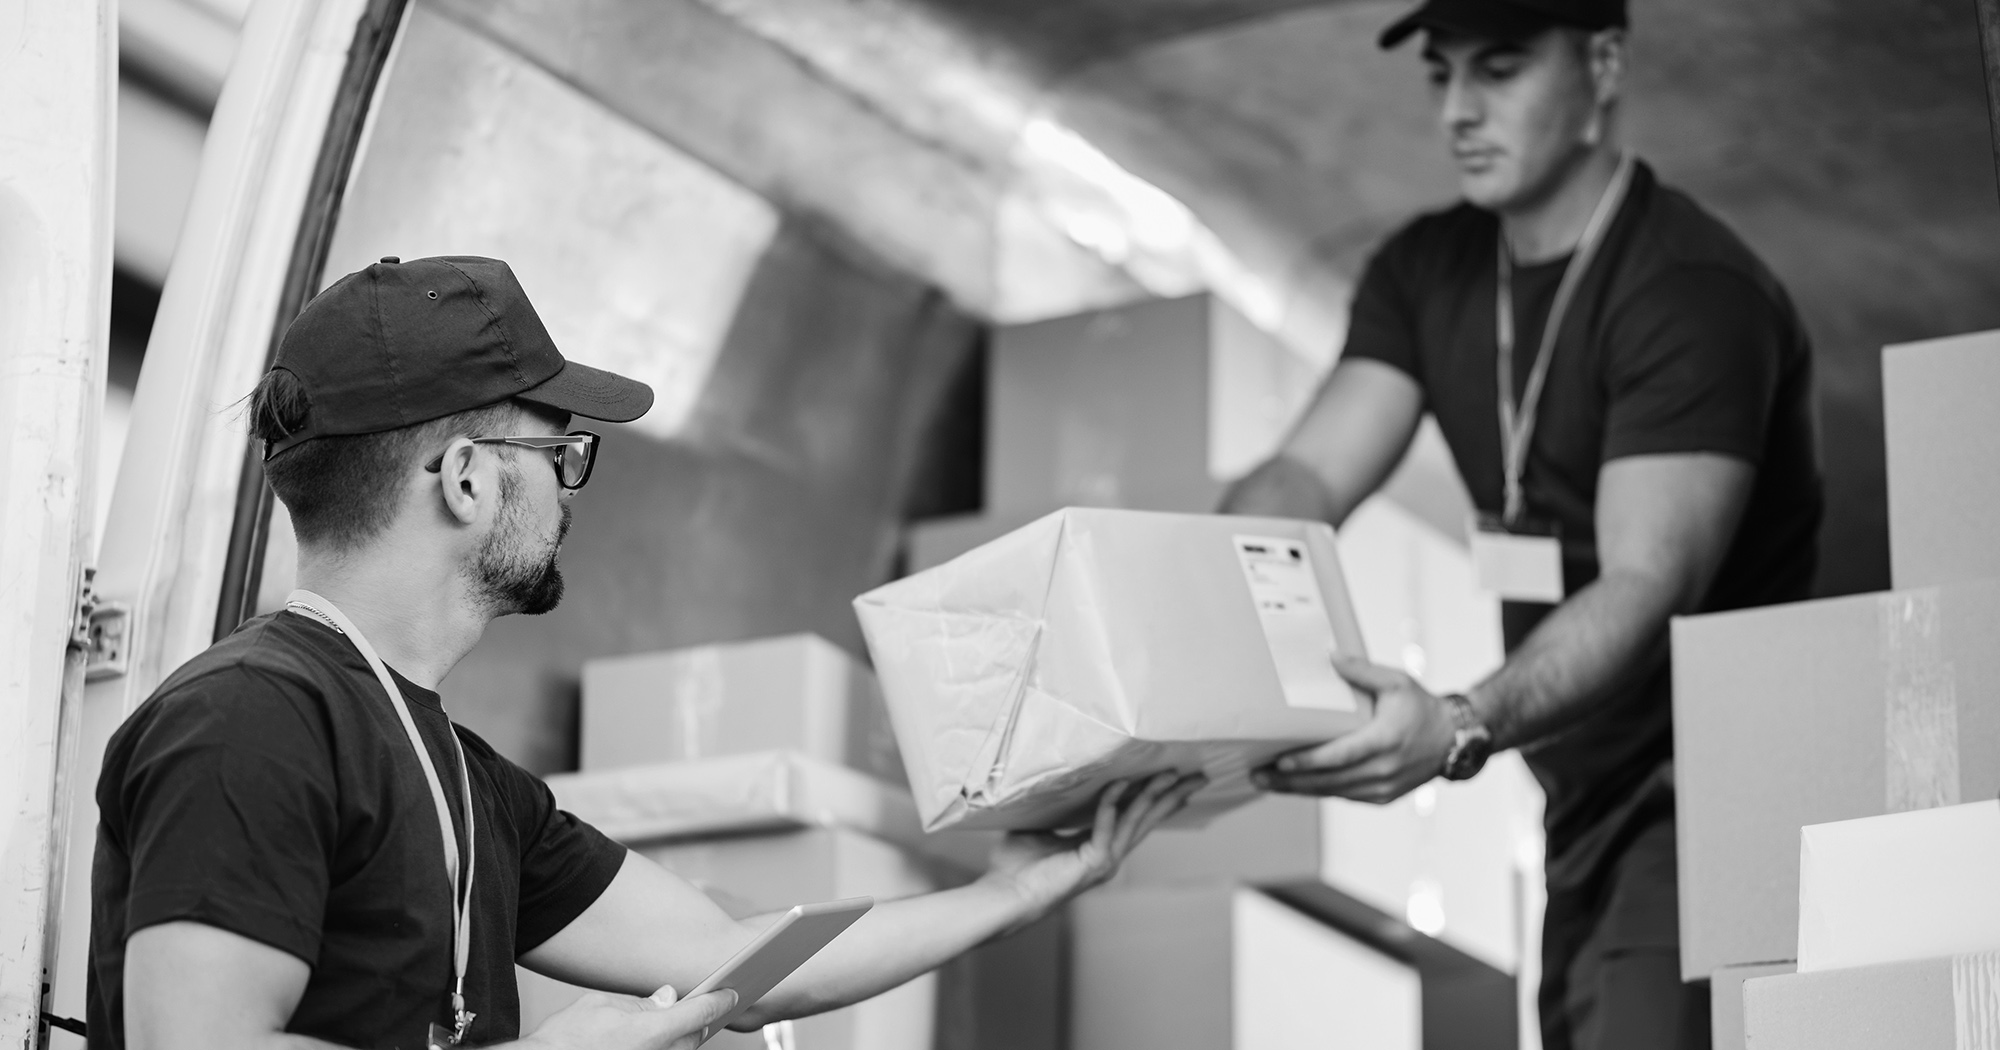 Ecommerce staffing worker hands boxes out of truck to another worker.